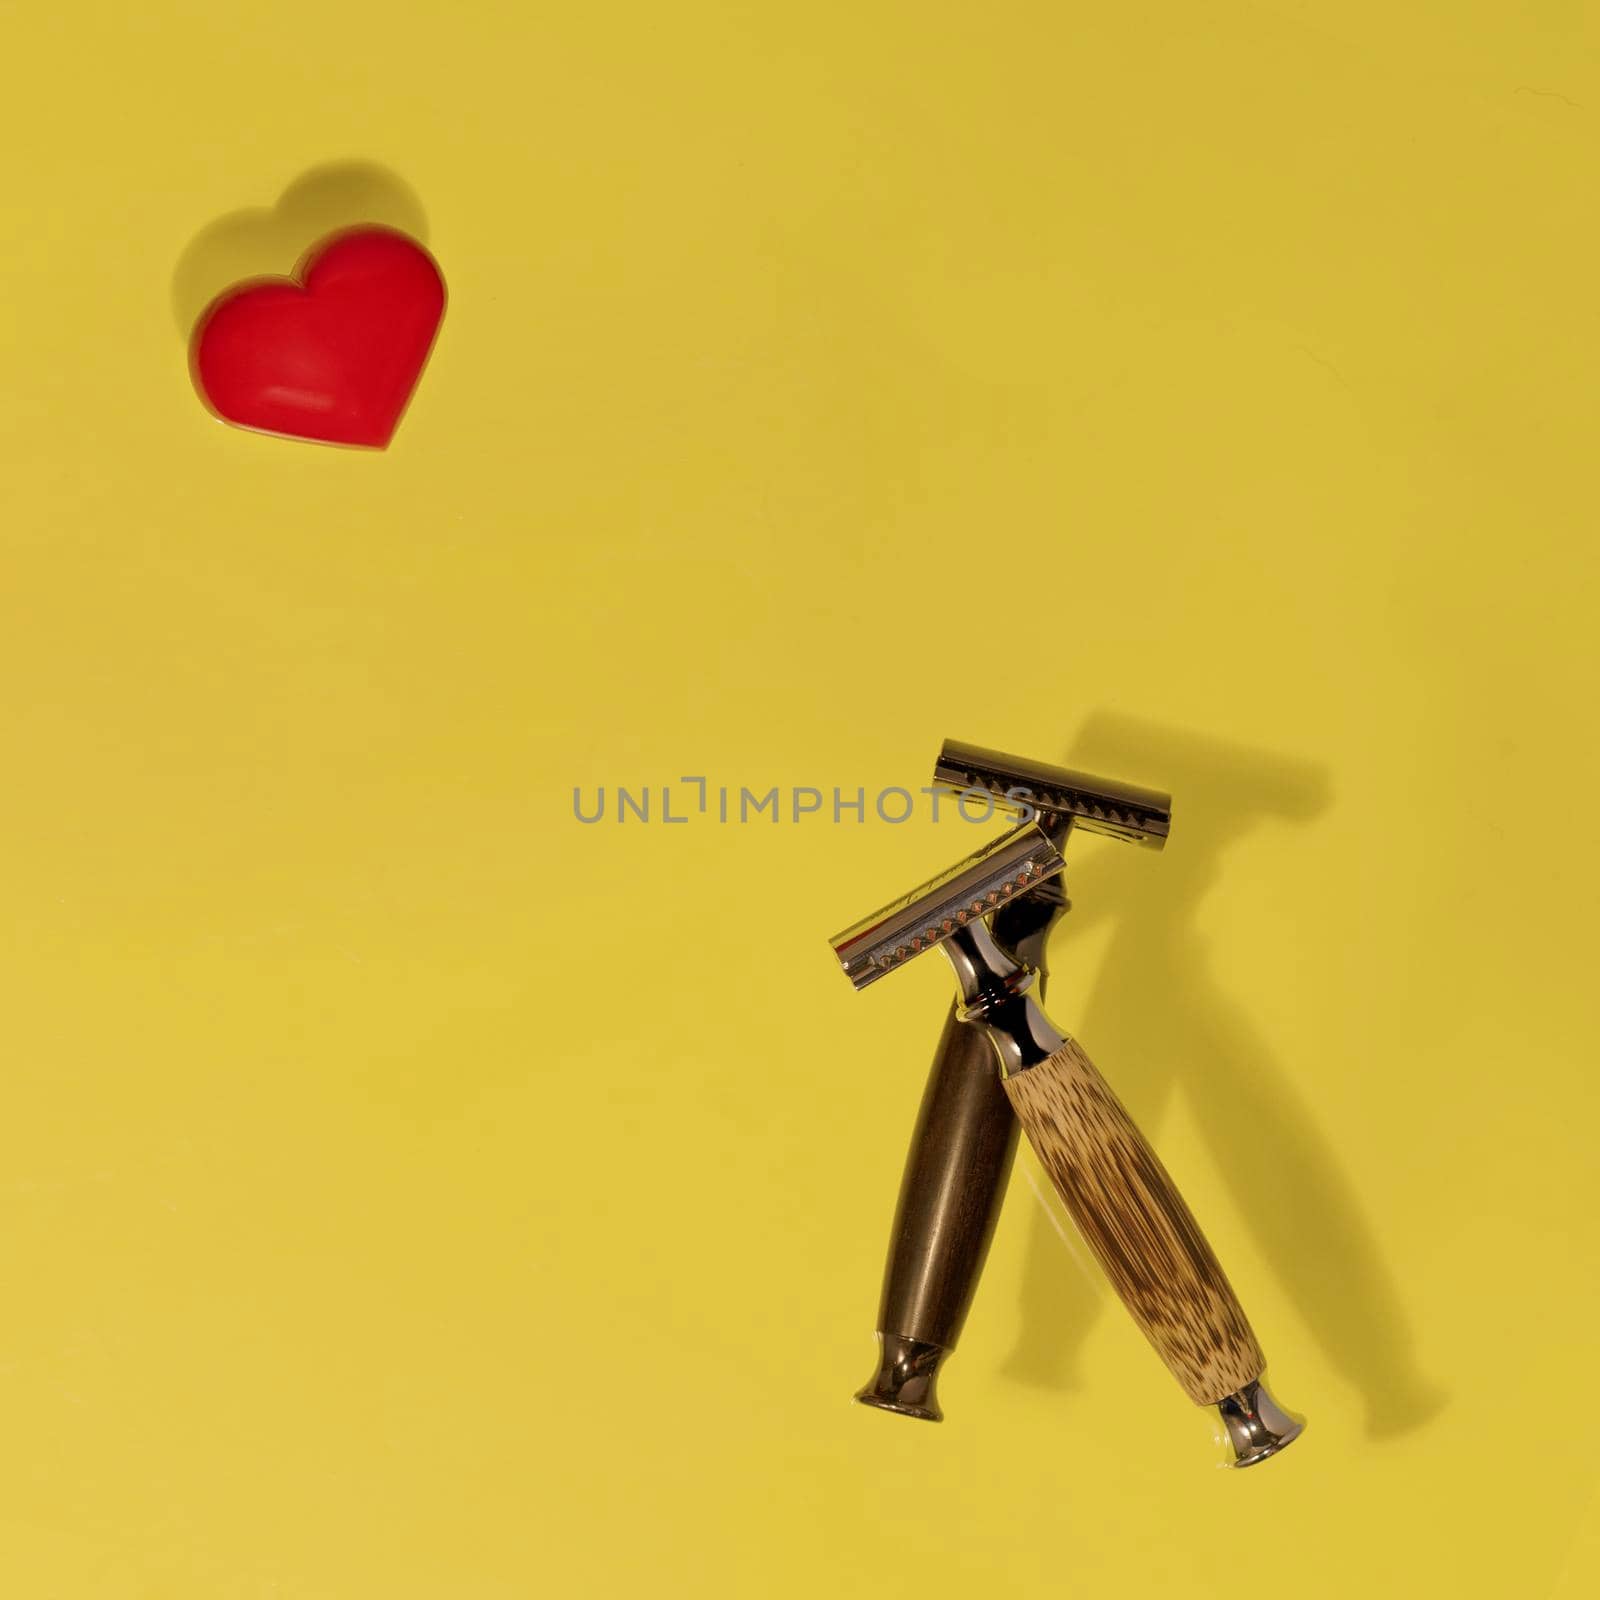 two razors and red heard on yellow background